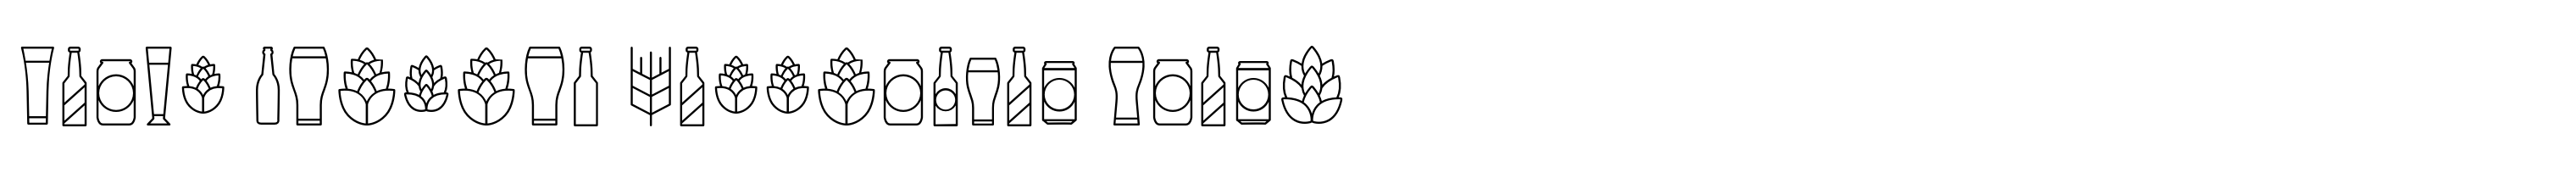 Local Brewery Collection Icons